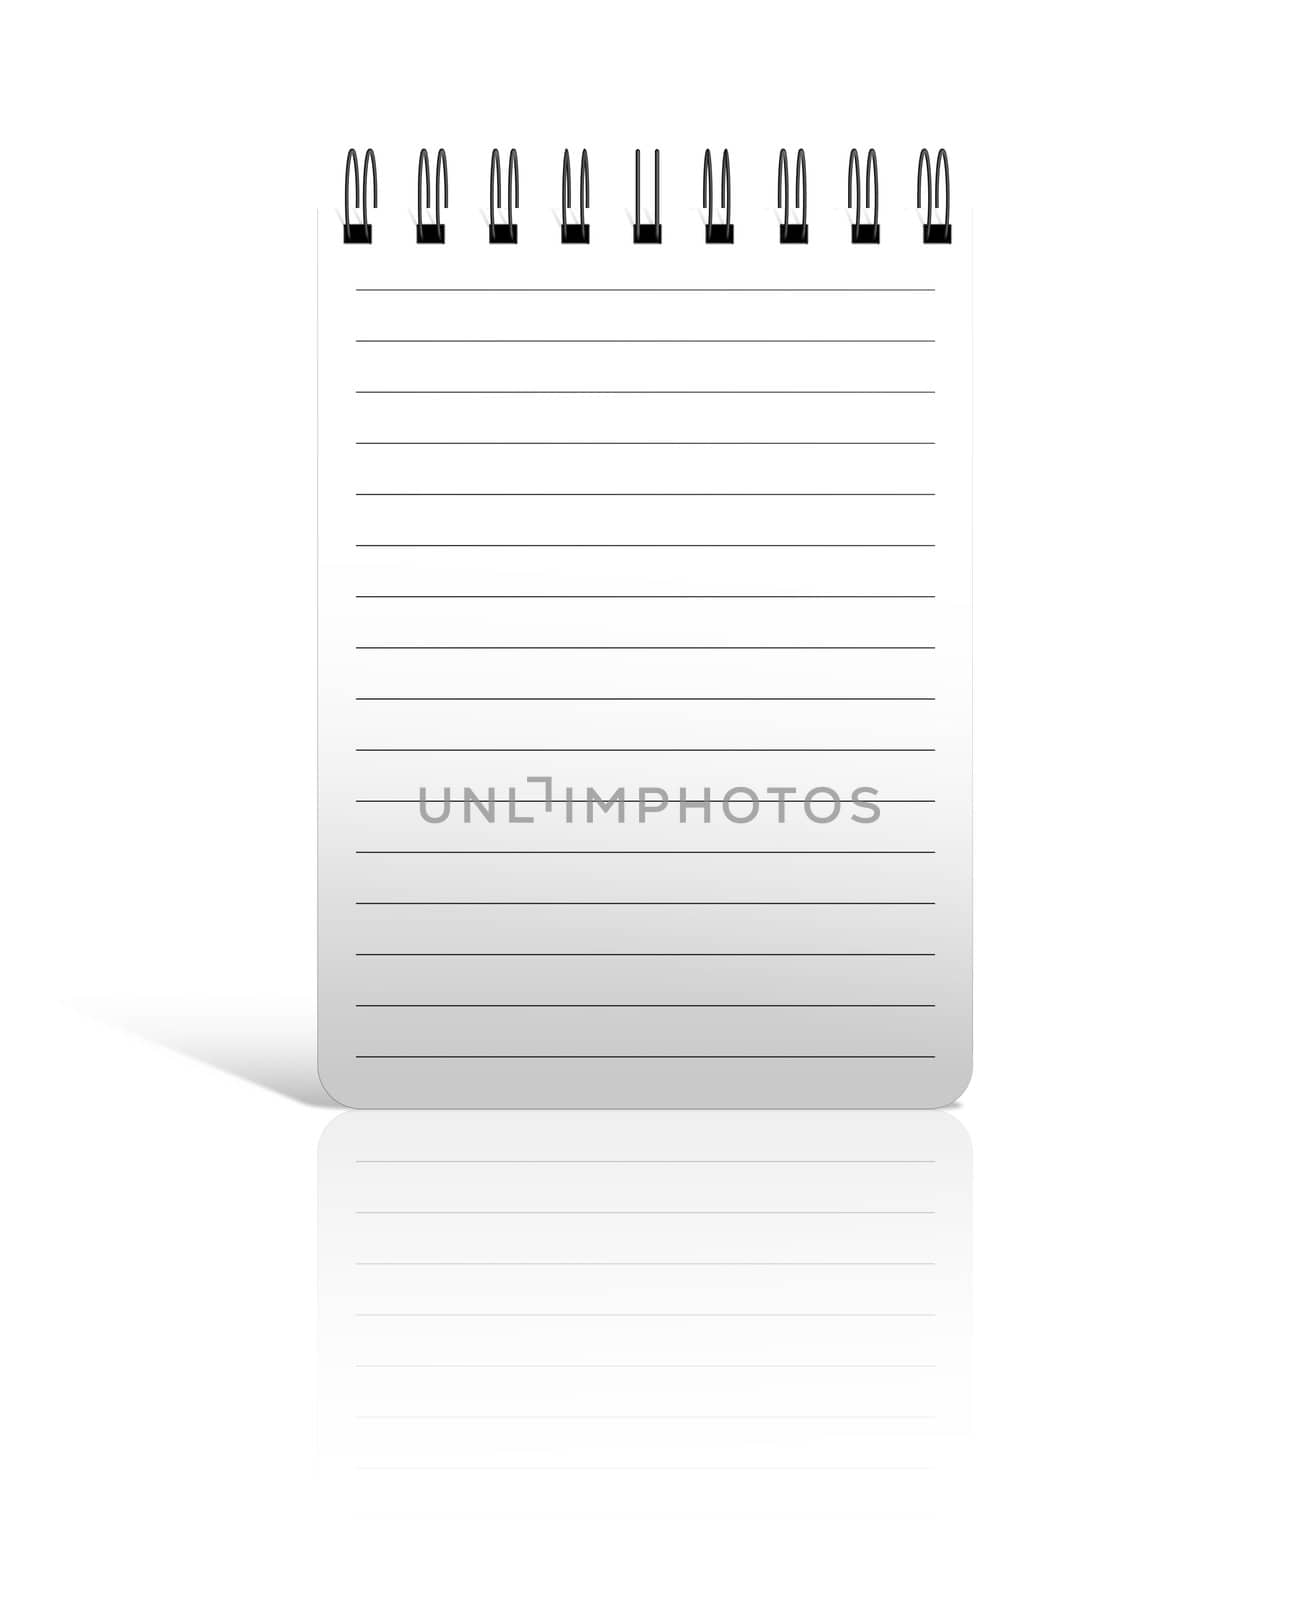 blank white spiral notepad isolated on white background